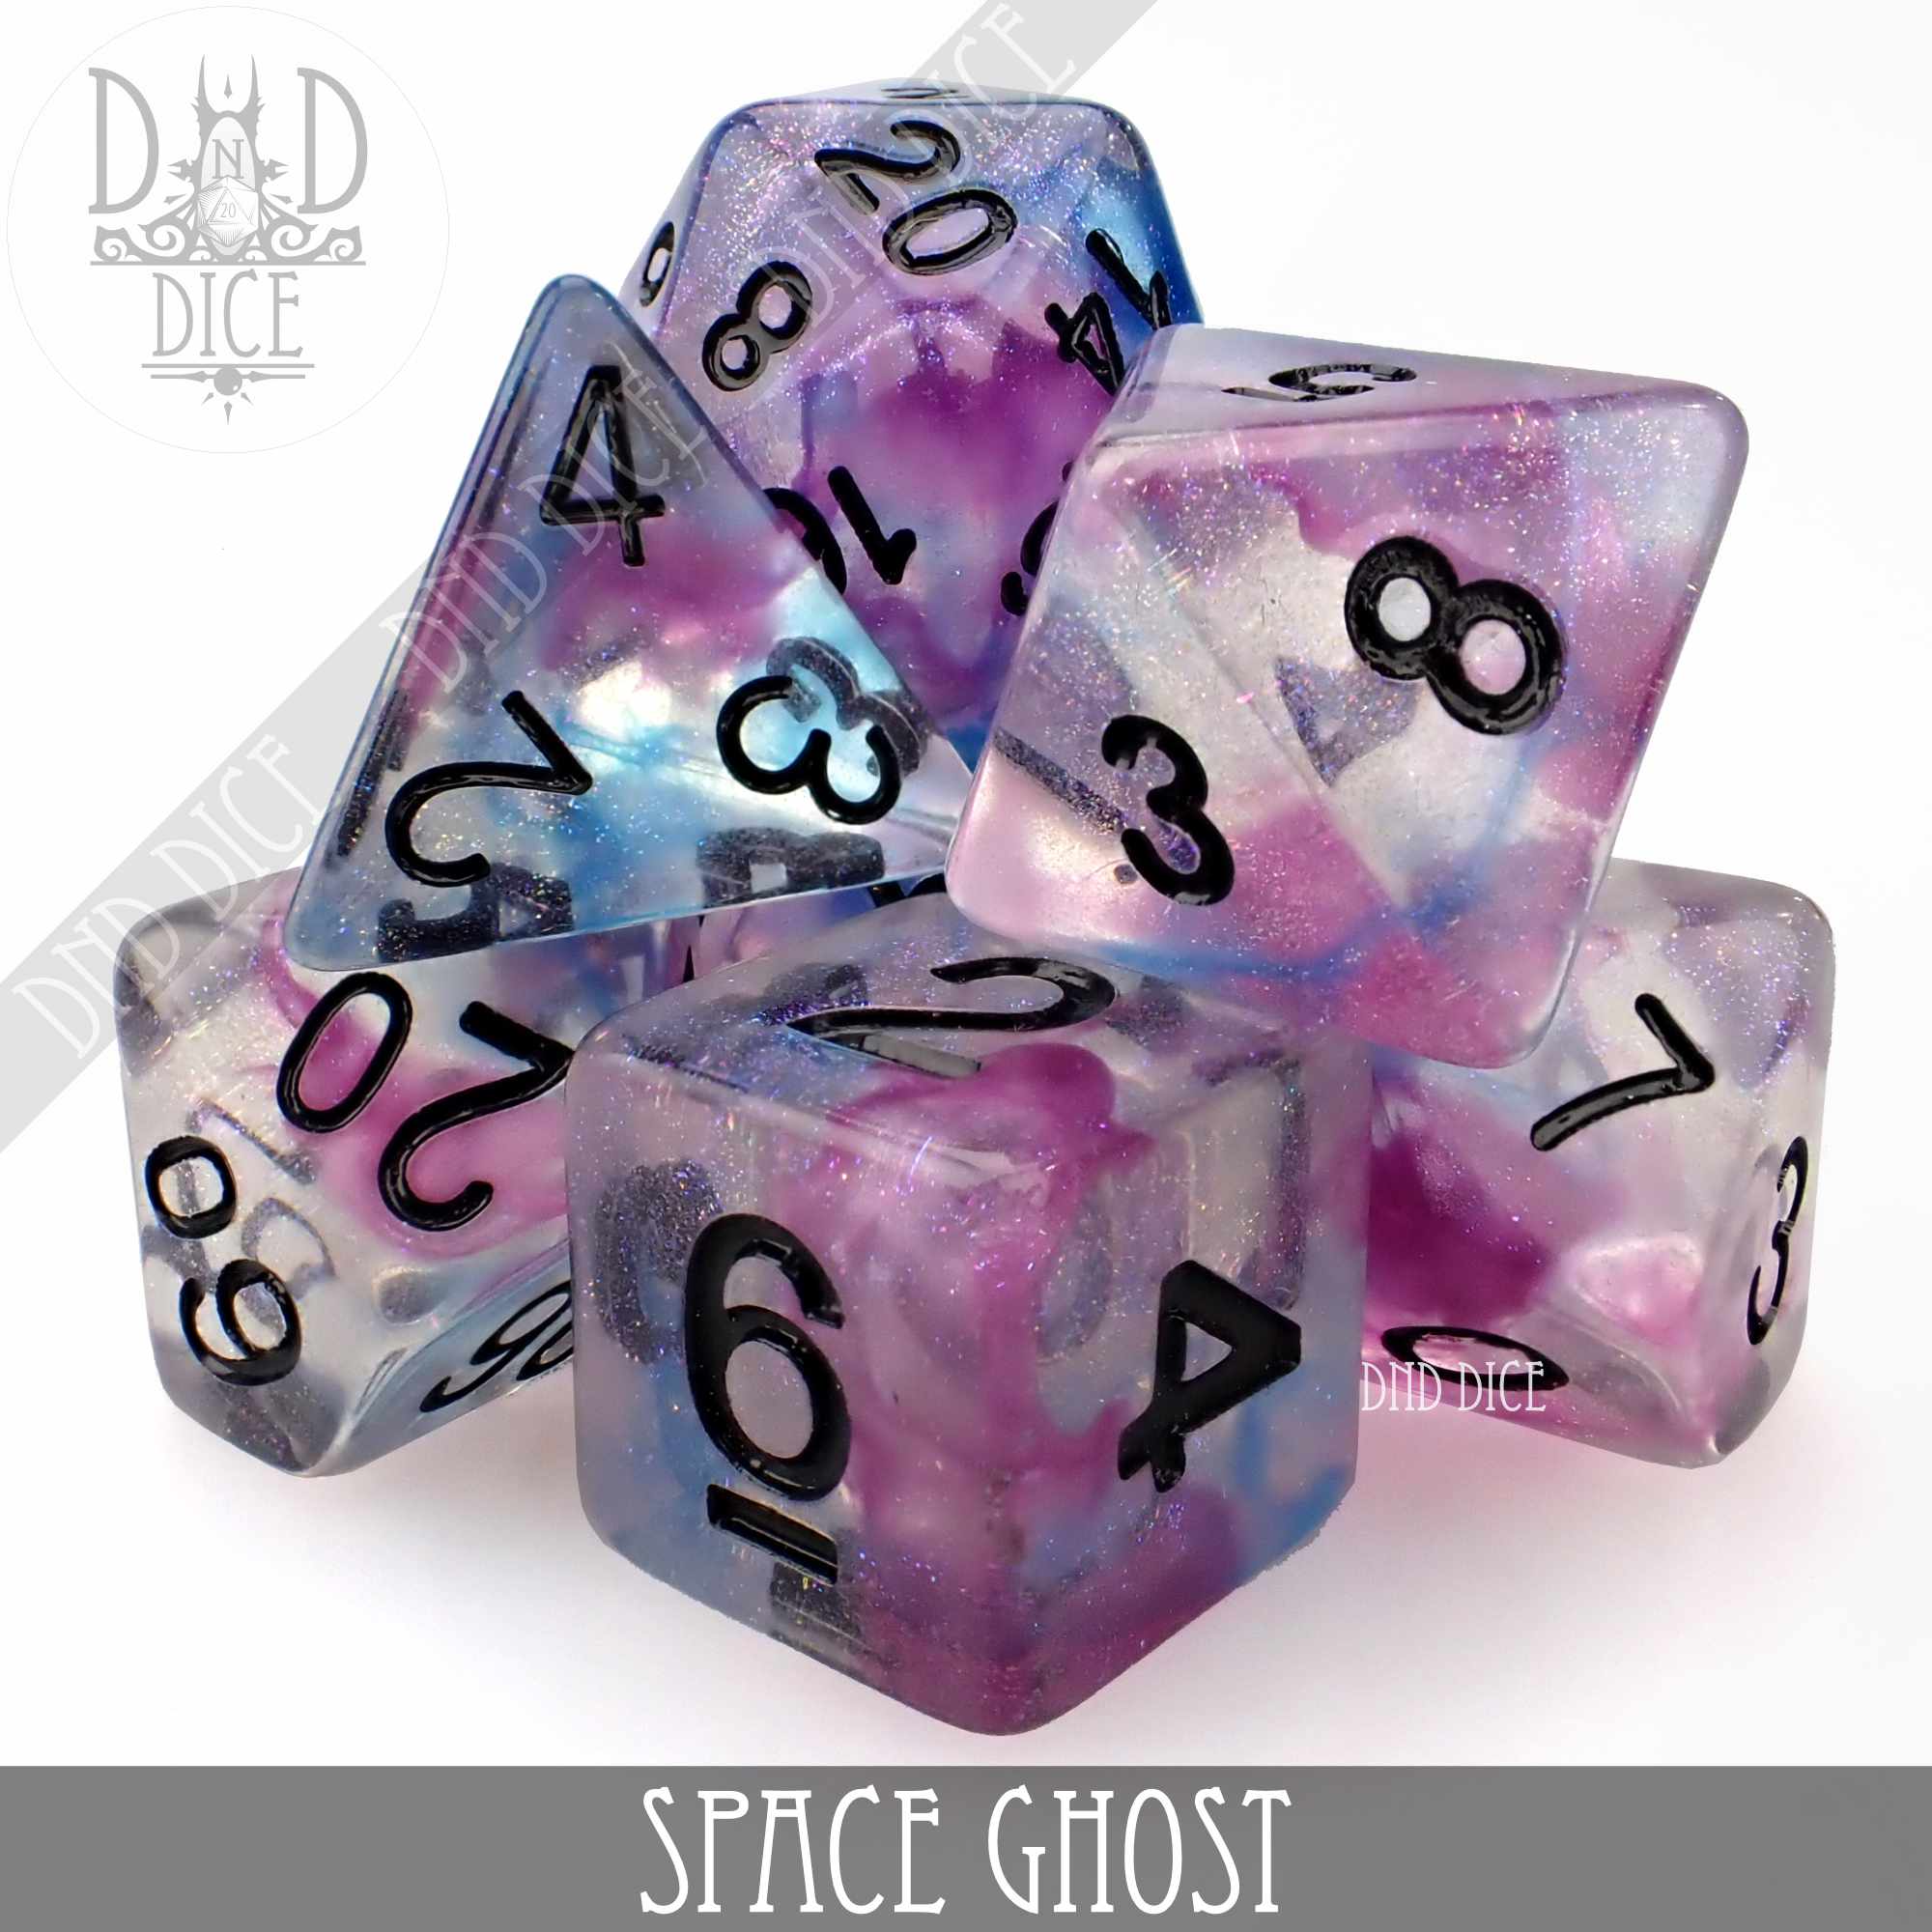 Space Ghost Dice Set